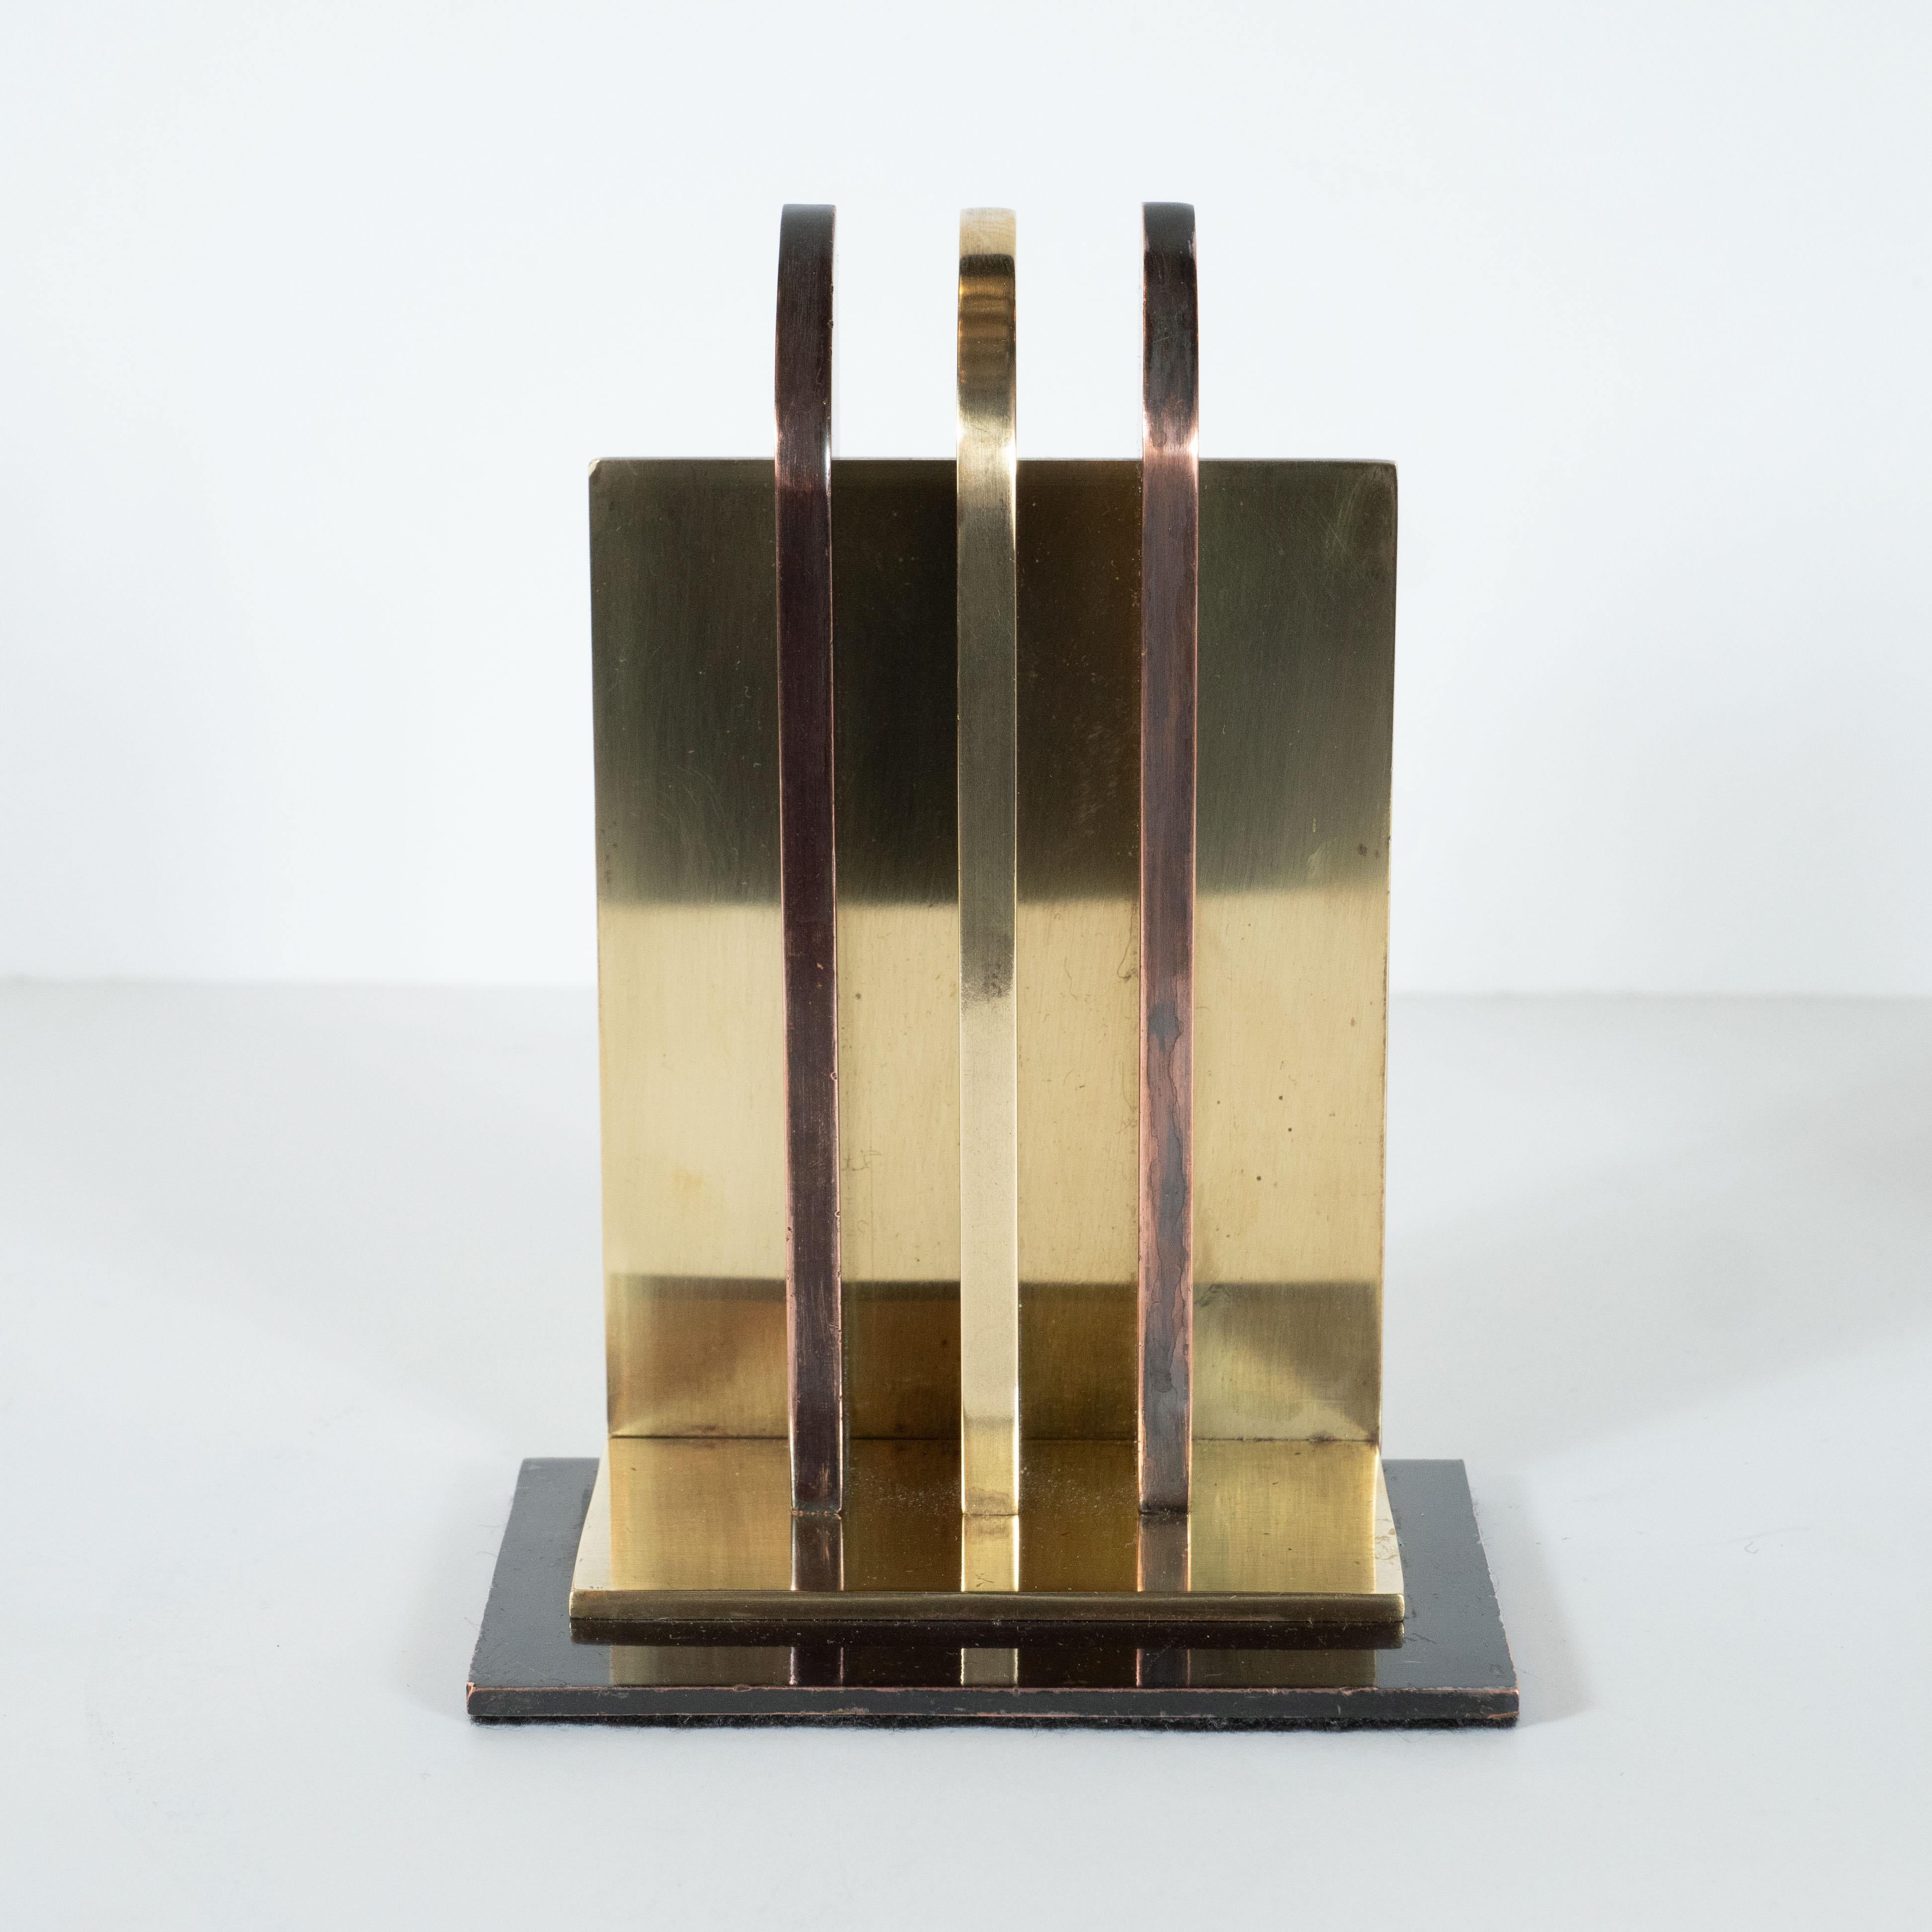 Art Deco Streamlined Copper & Brass Bookends by Walter Von Nessen for Chase Co. 1